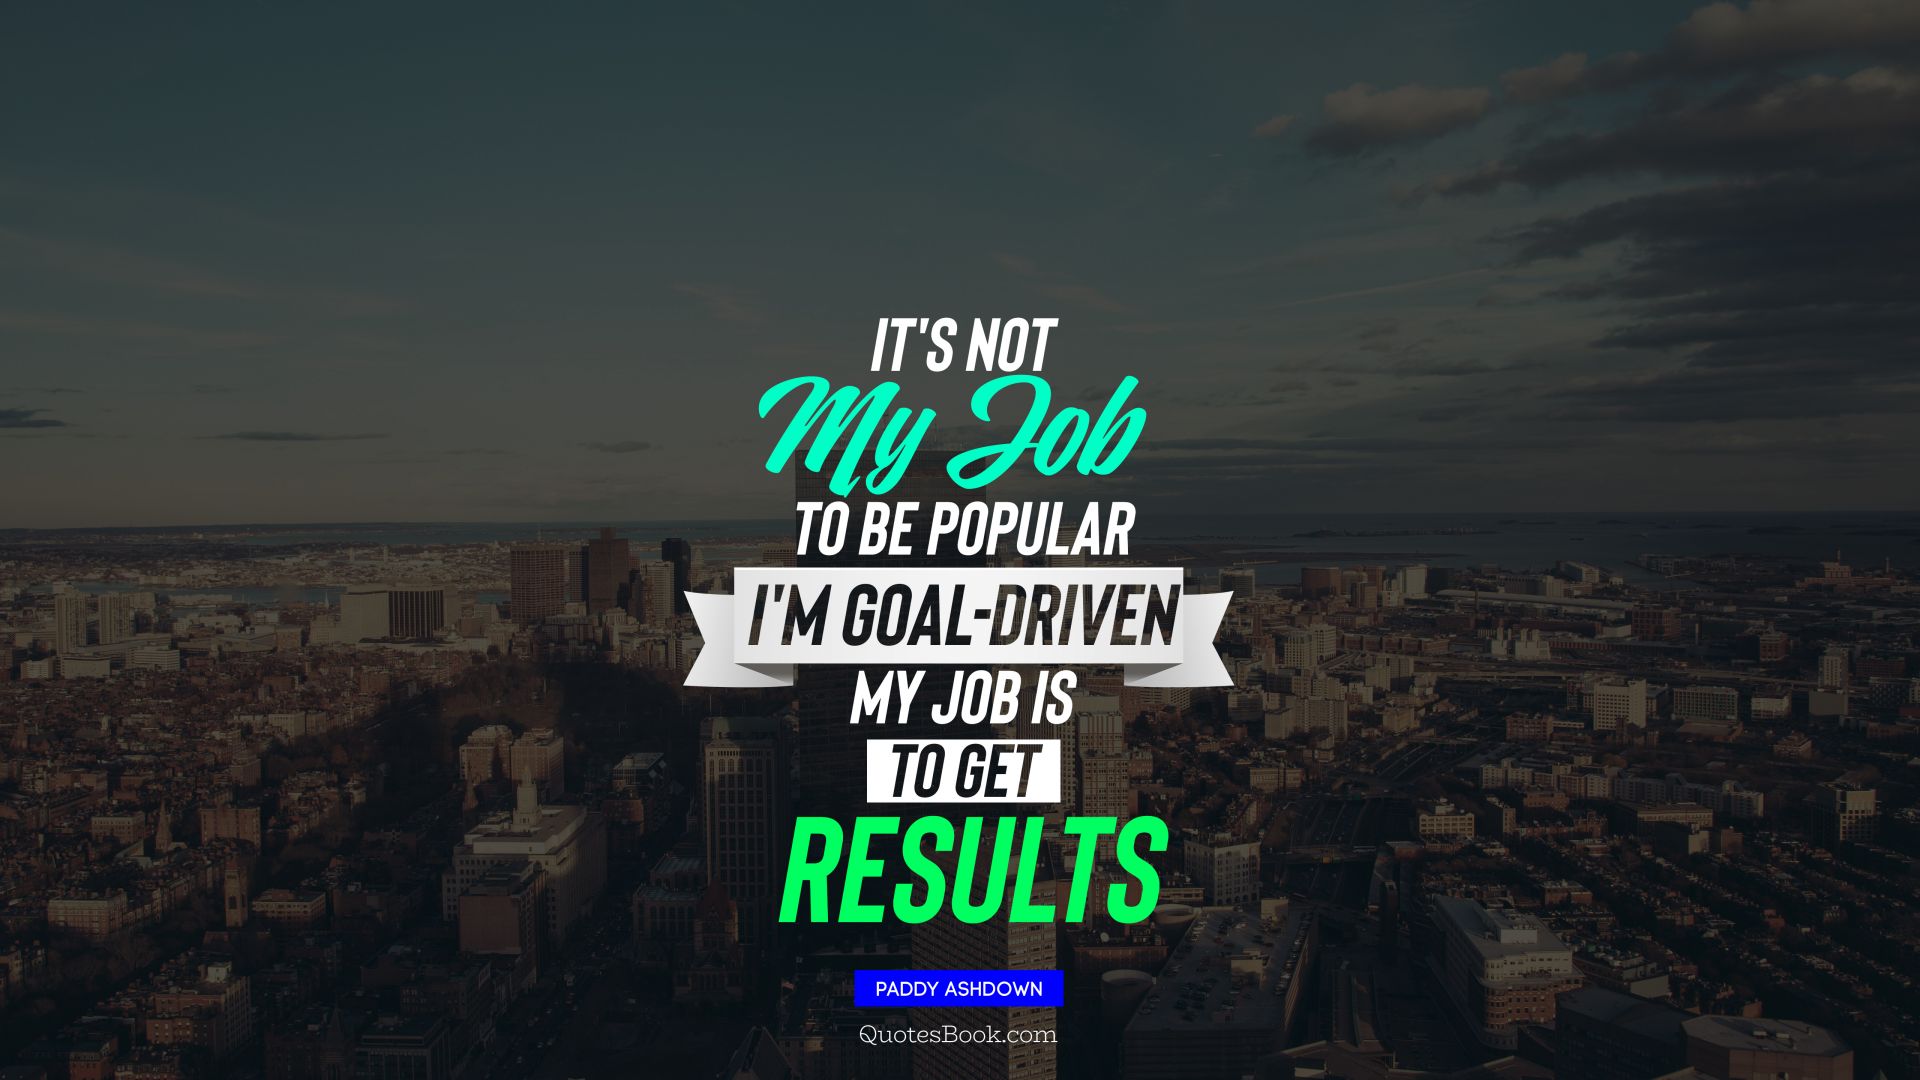 It's not my job to be popular I'm goal-driven my job is to get results. - Quote by Paddy Ashdown